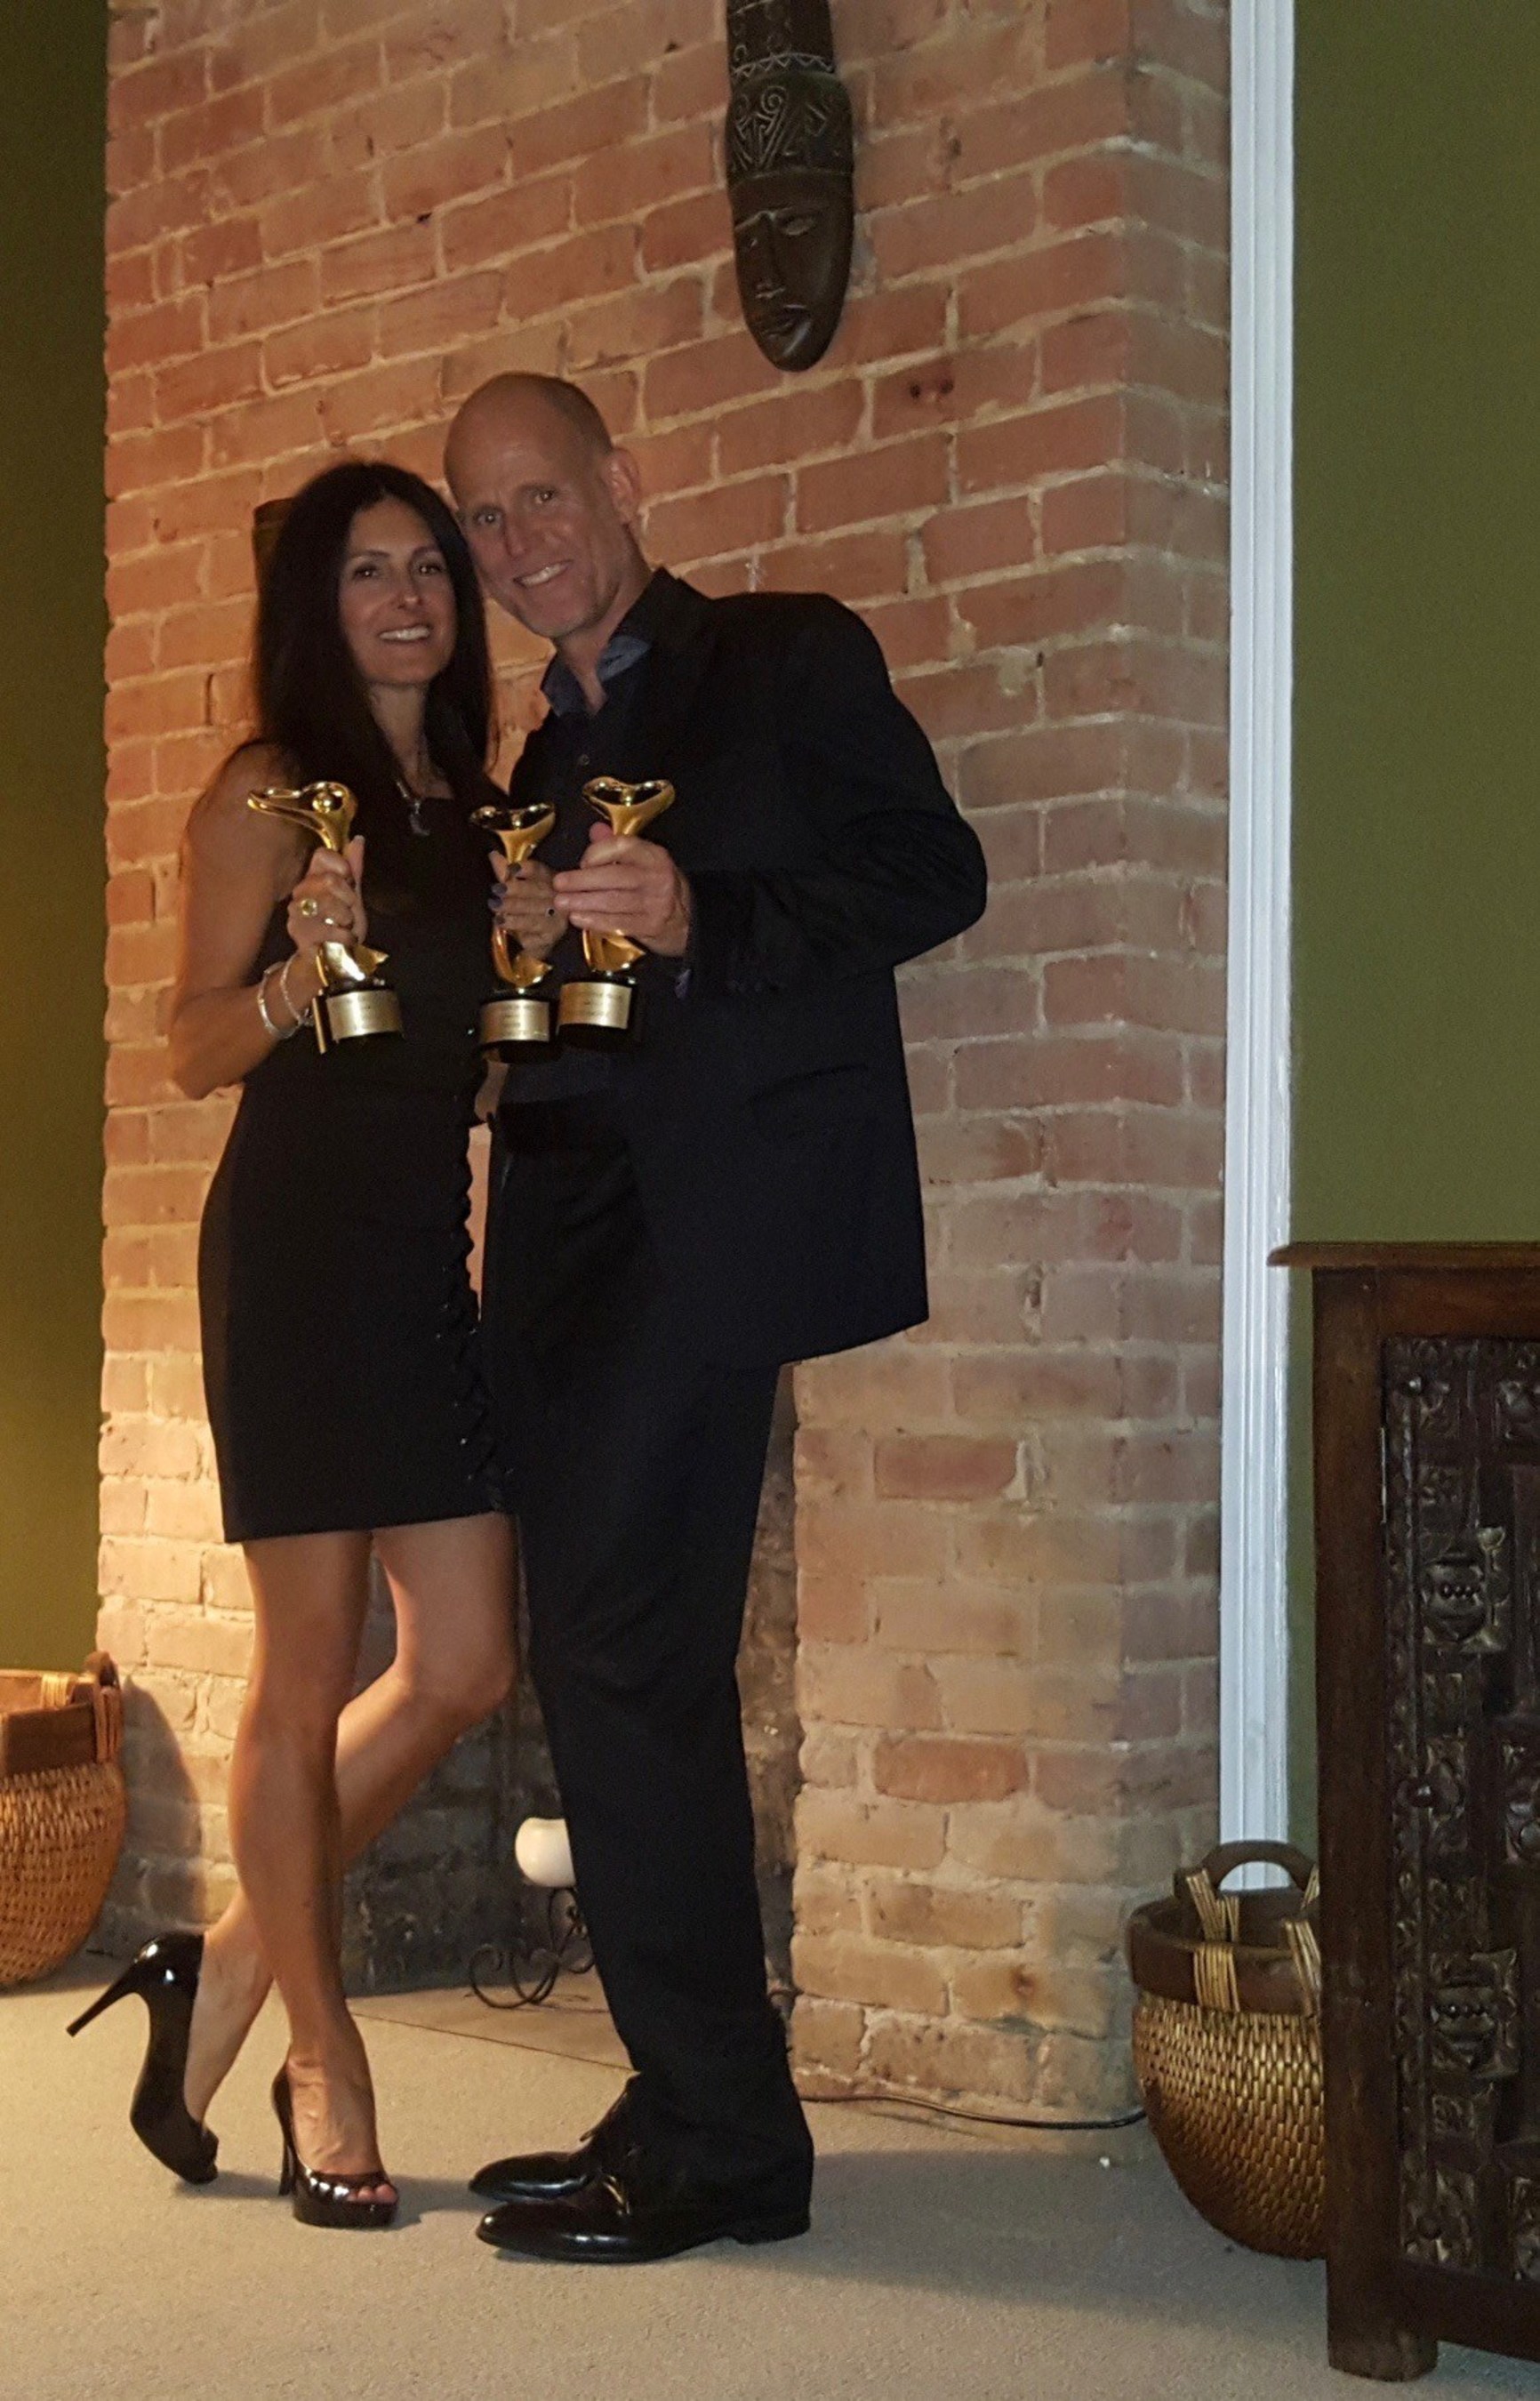 Dallas Couple Win Several Coveted Awards at 2016 Annual Lifestyle Awards image